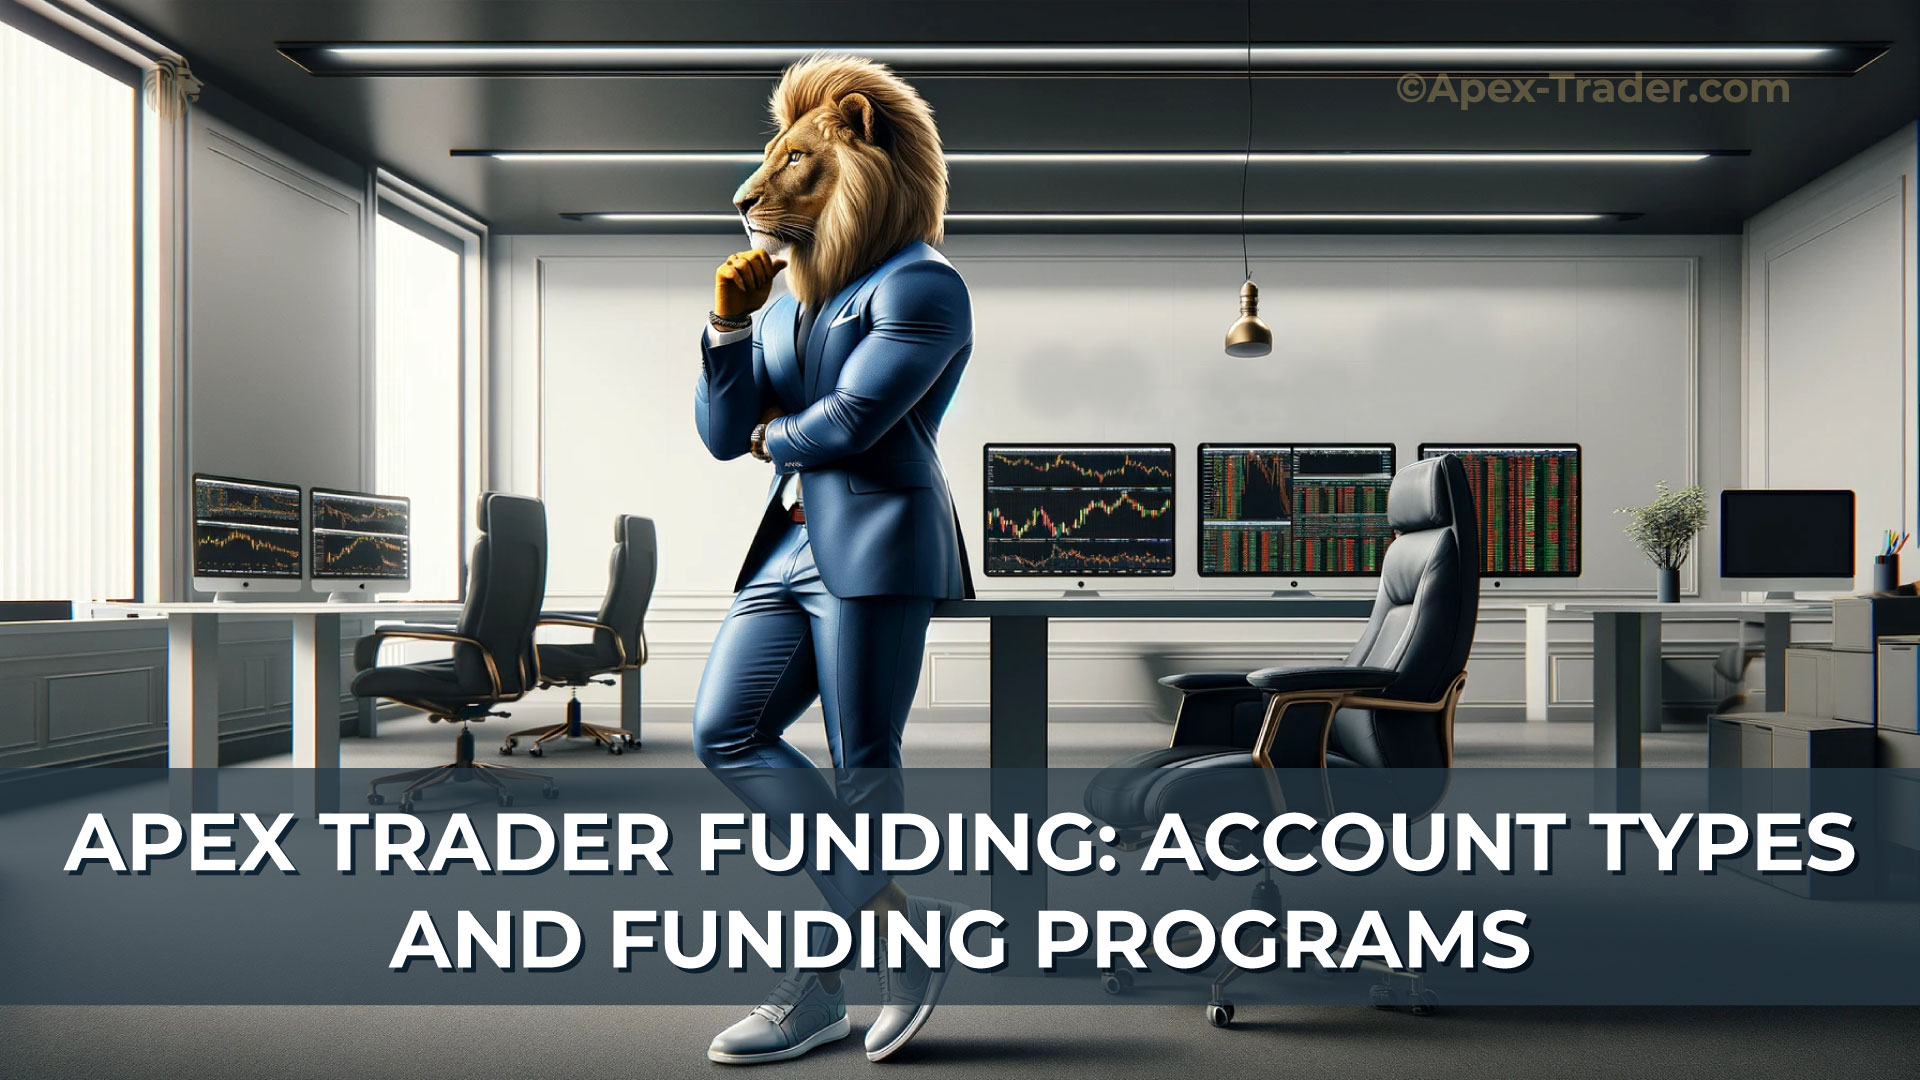 Apex-Trader-Funding-Account-Types-and-Funding-Programs-On-Apex-Trader-Website